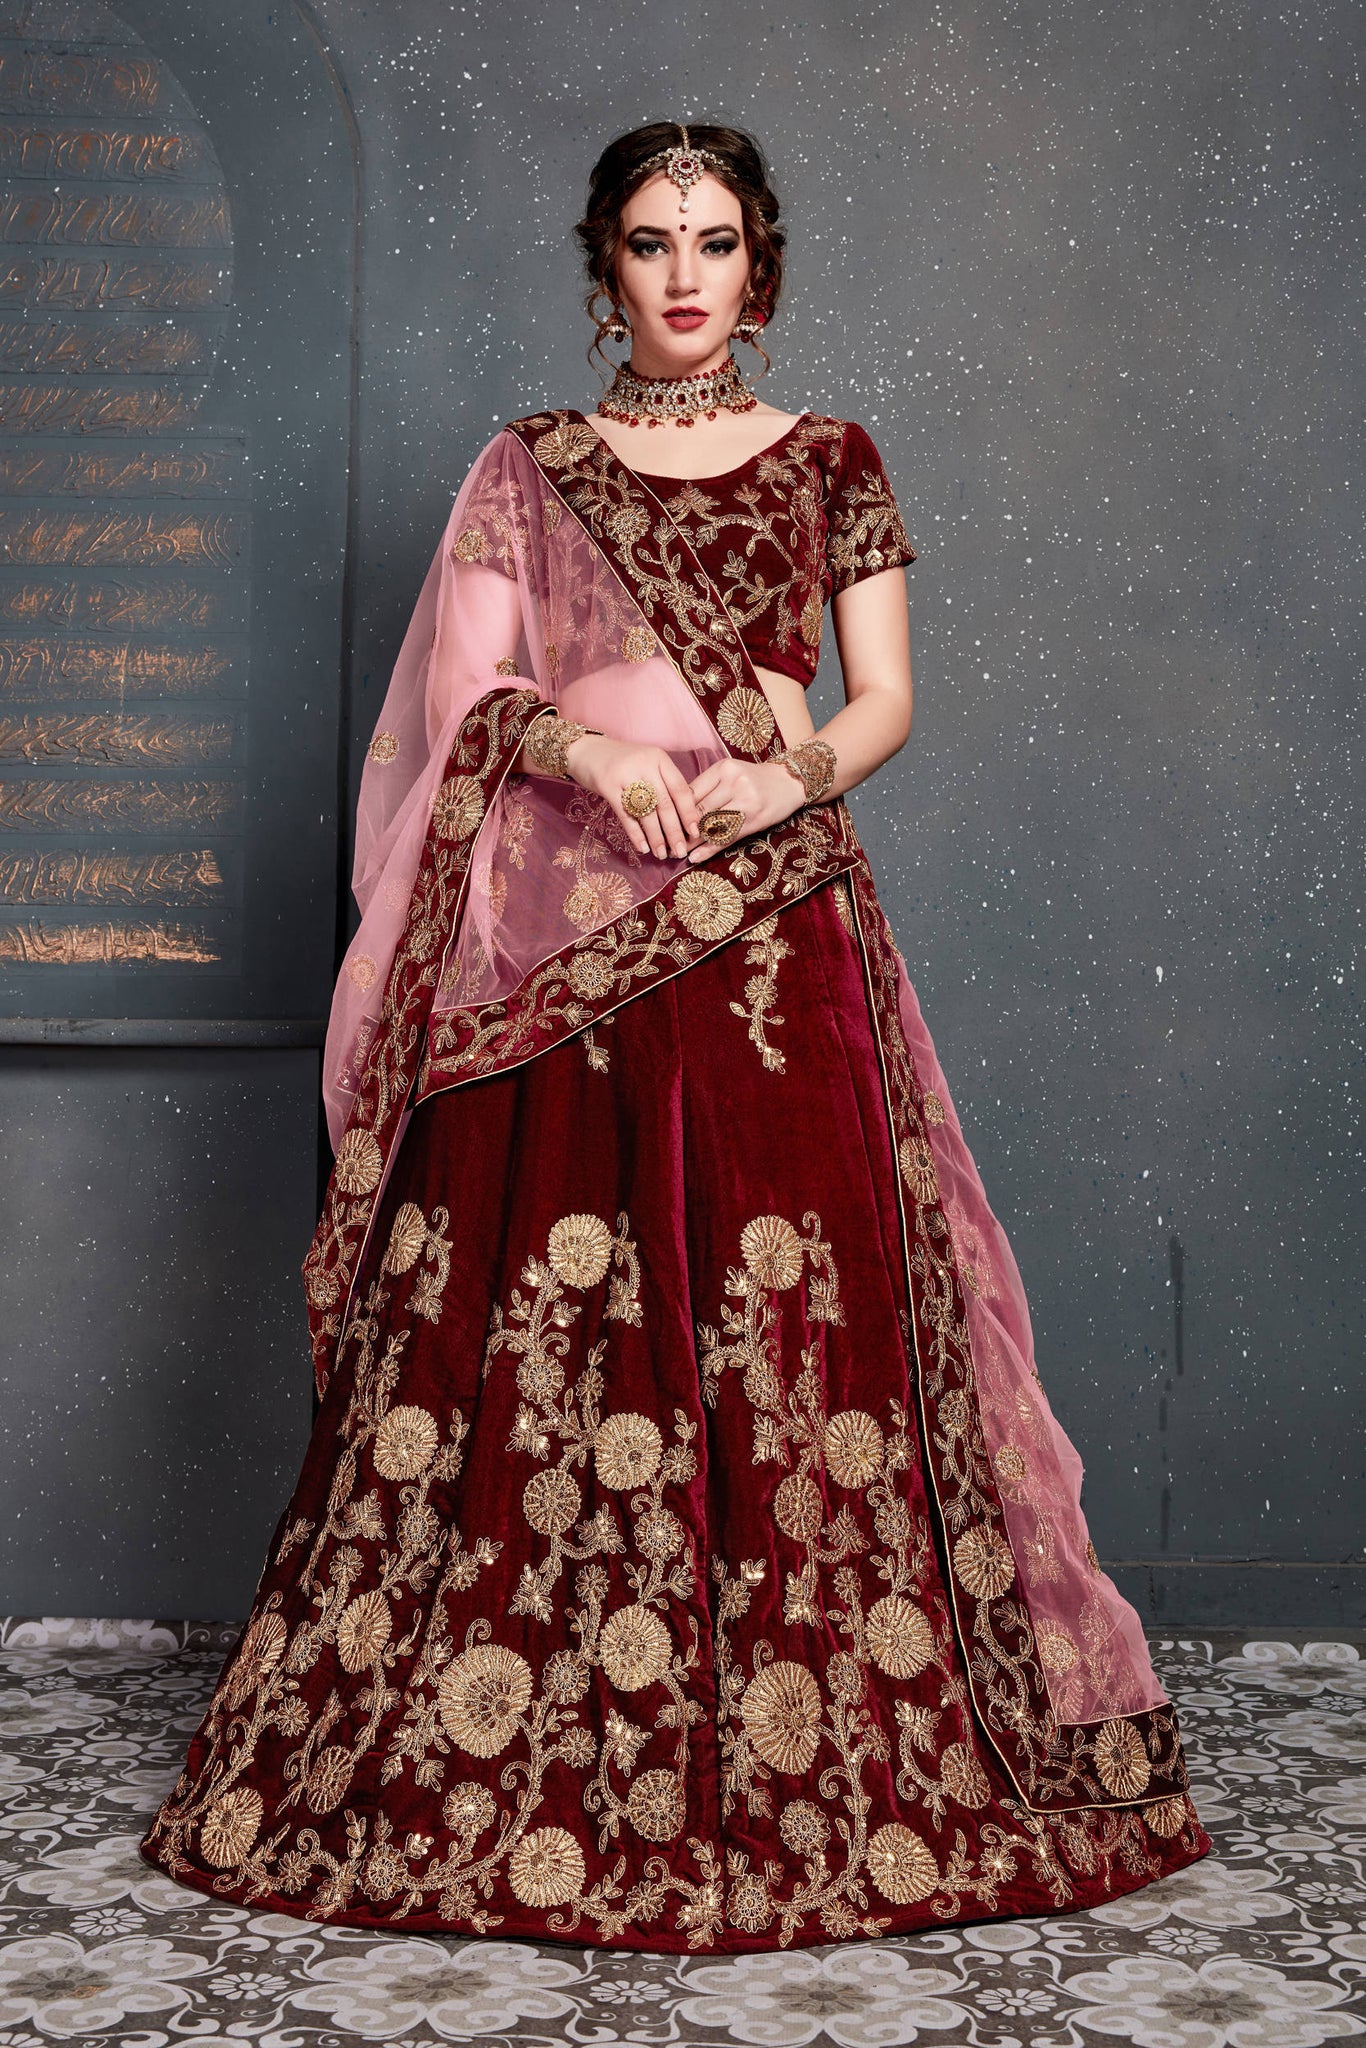 Indian Bride Essentials and Clothing at Indya